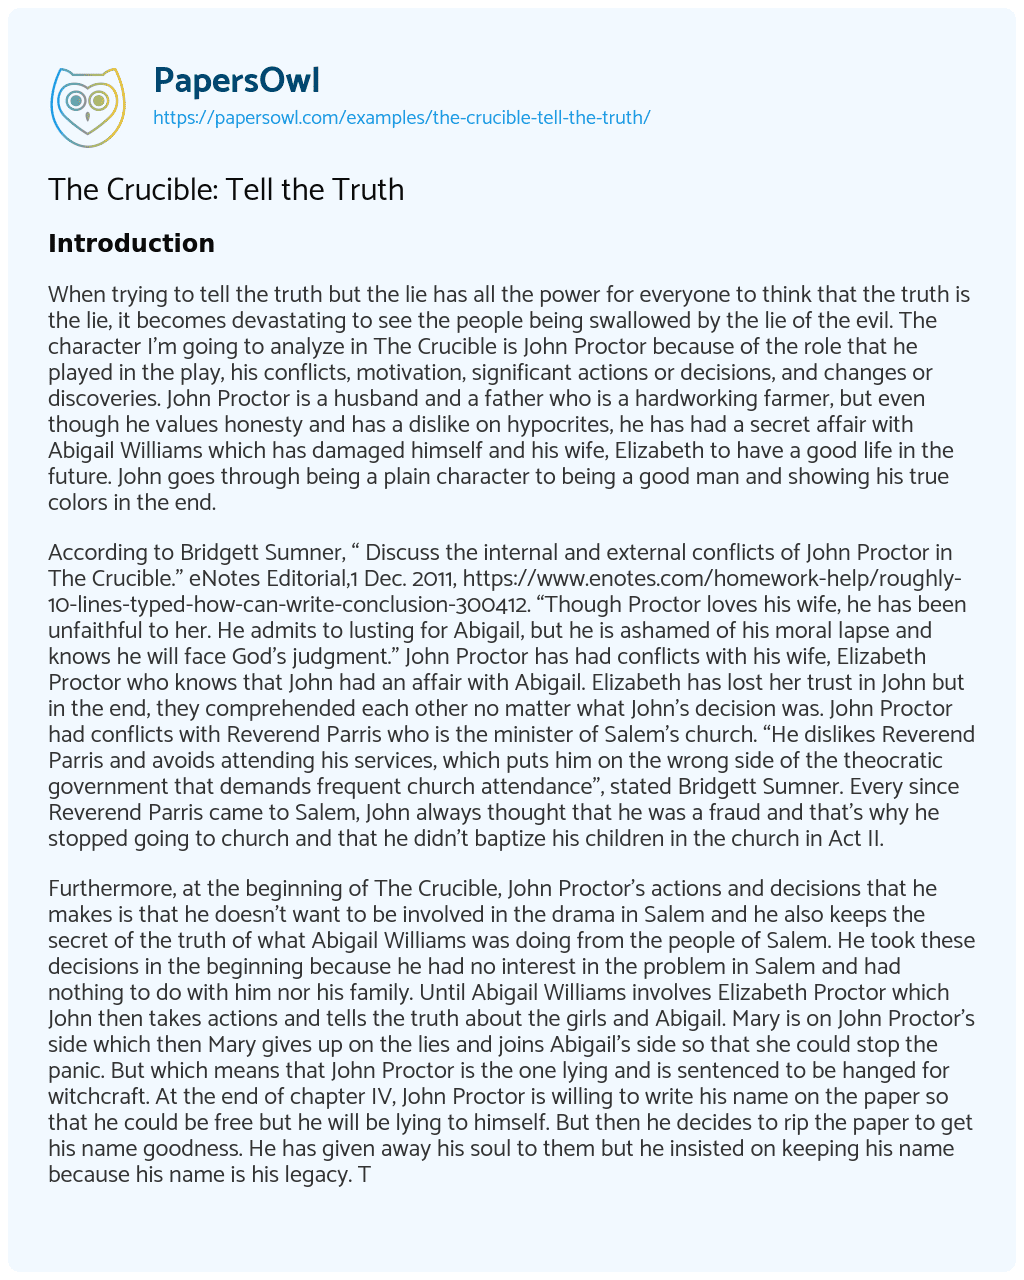 Essay on The Crucible: Tell the Truth